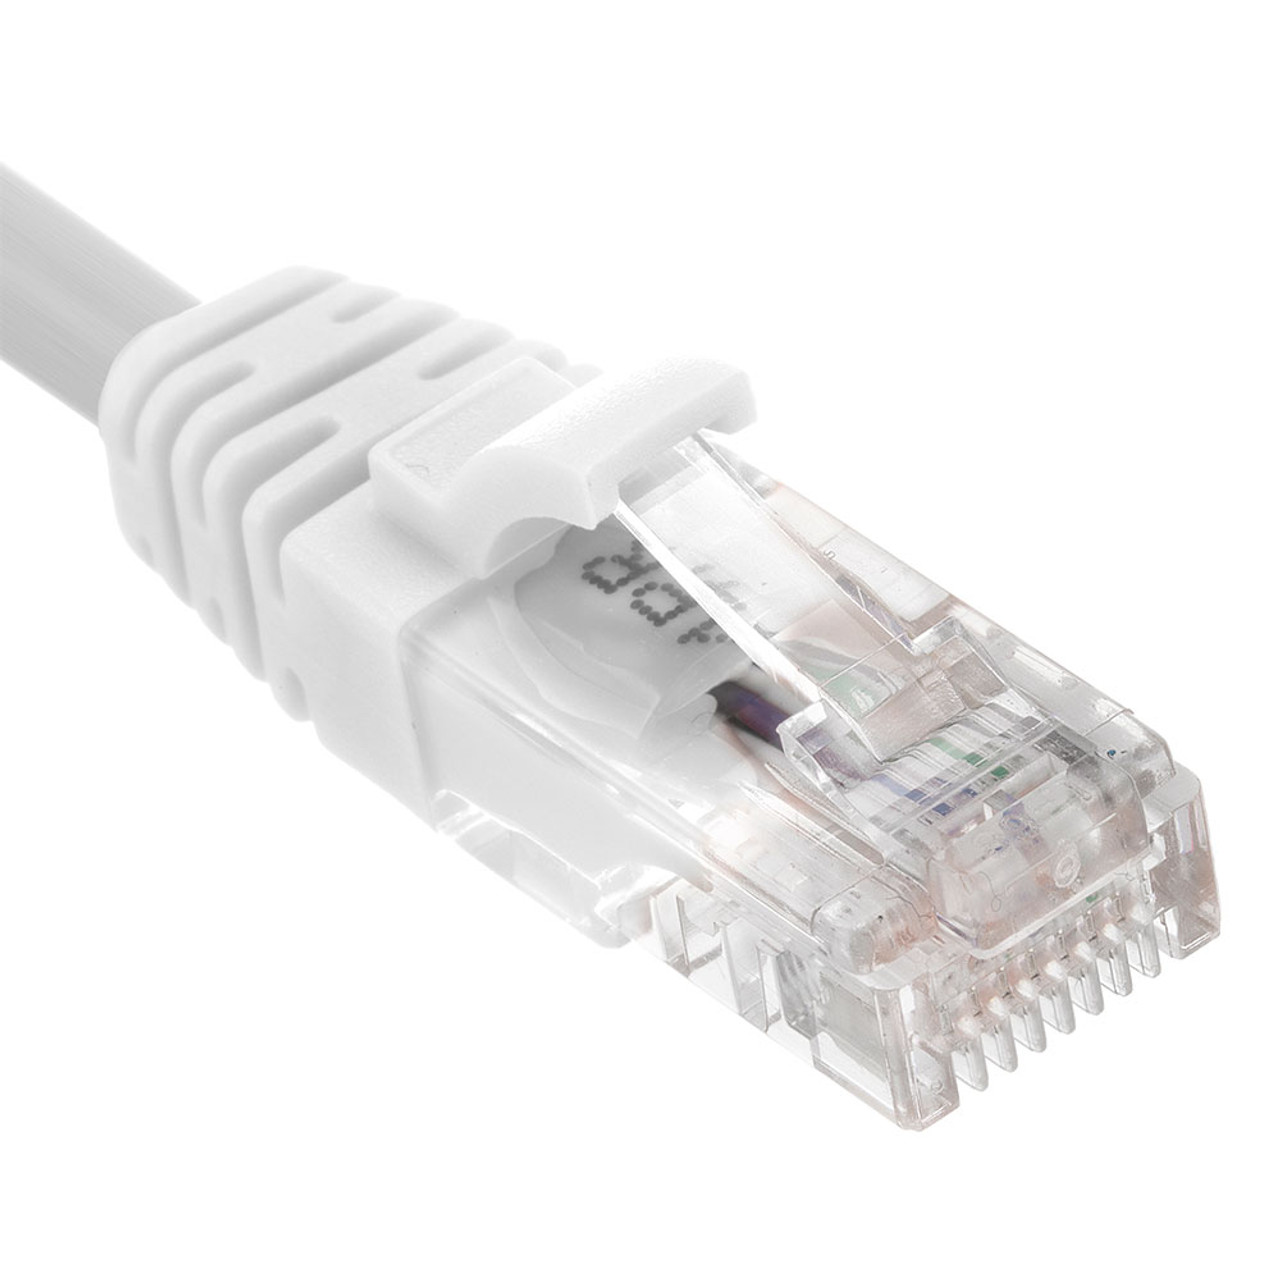 Ethernet Patch Cable CAT5E, UTP, 24AWG, 7 Ft,  10 pack, White